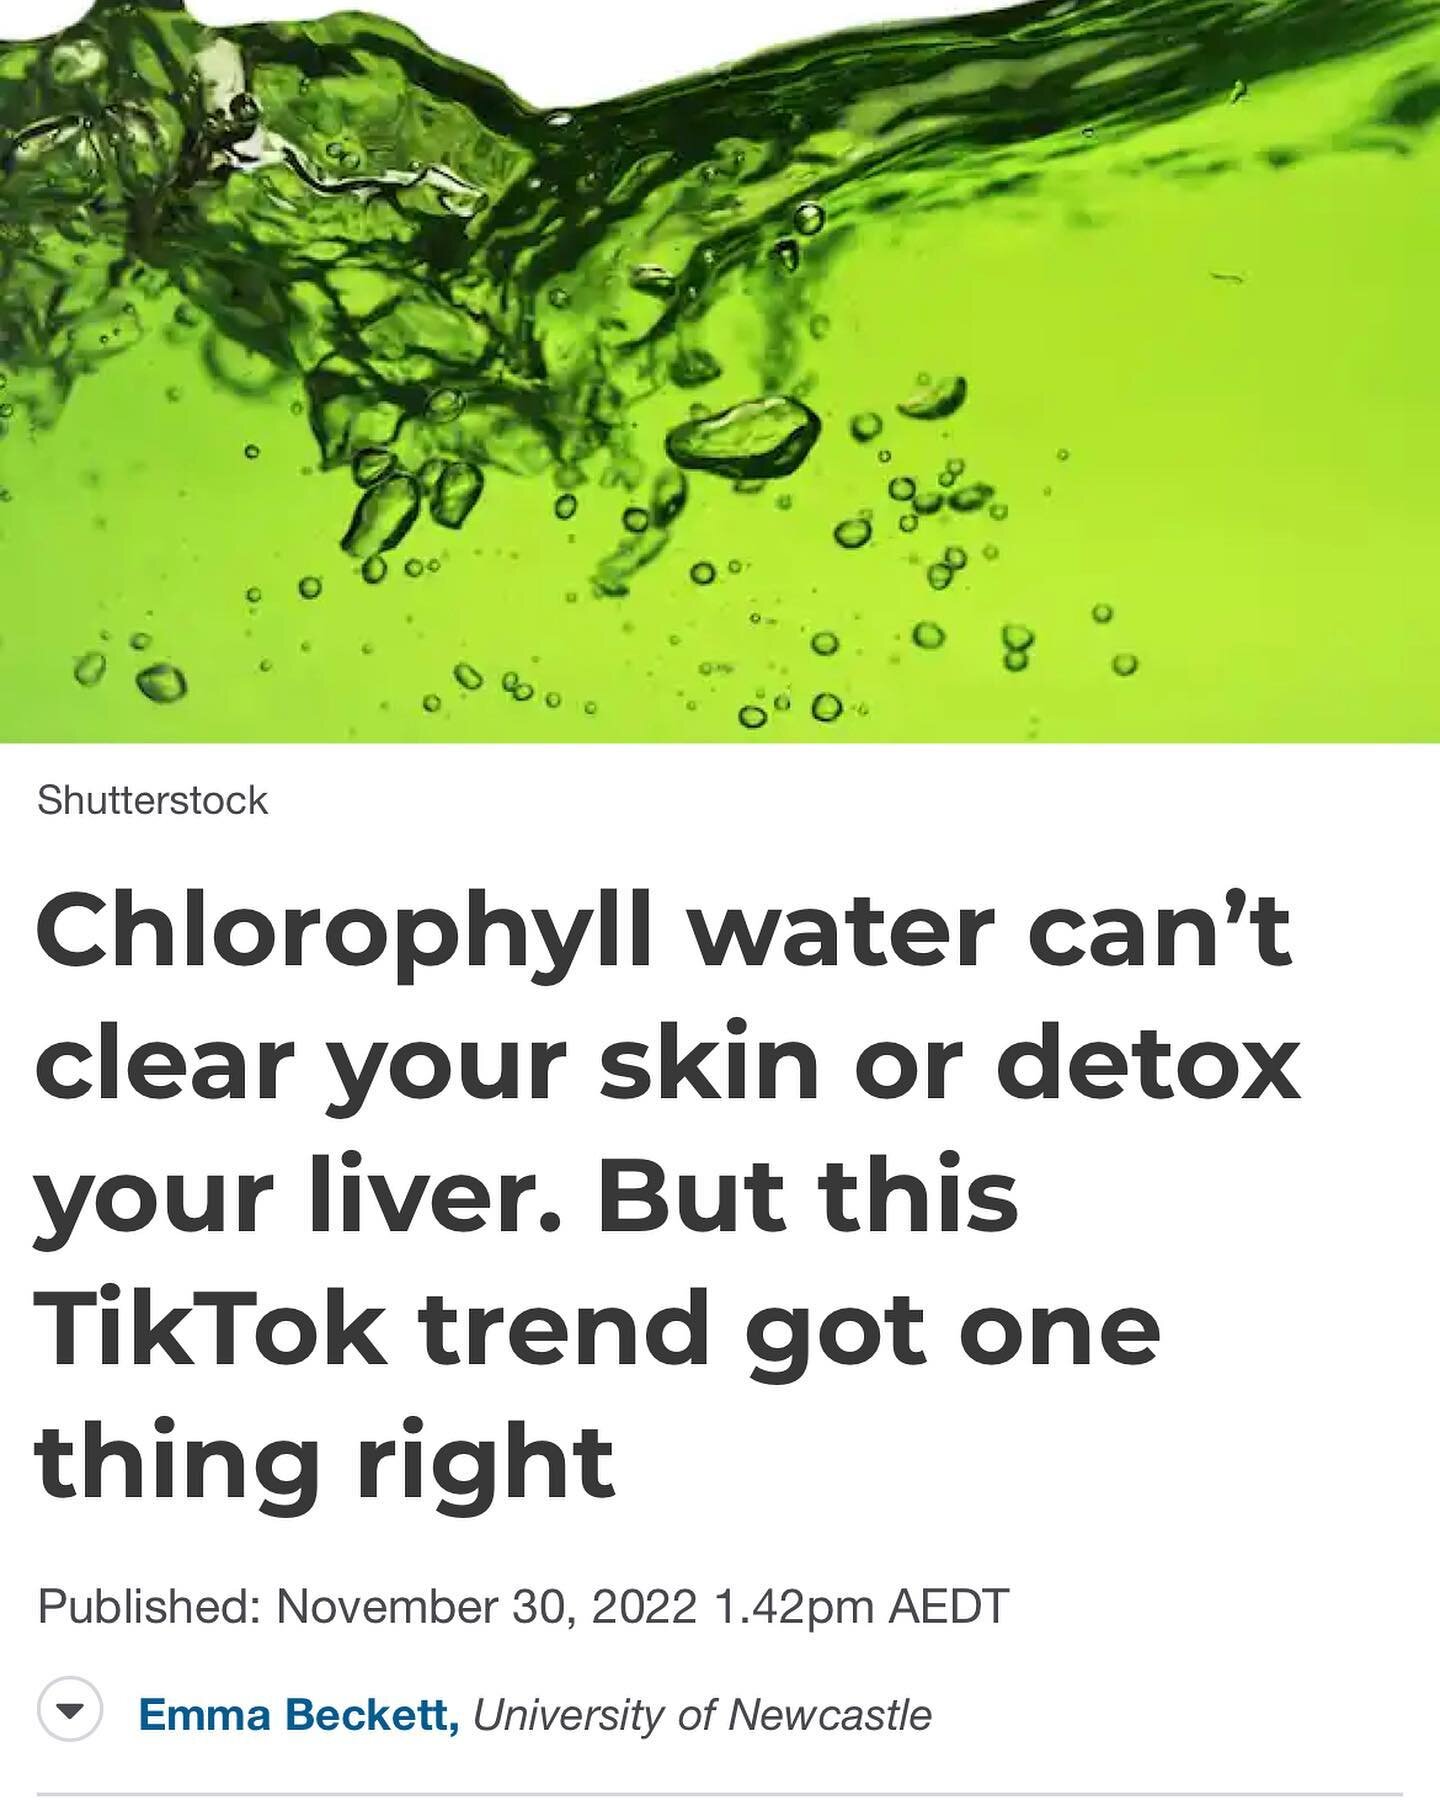 Chlorophyll water - it&rsquo;s not actually chlorophyll but it does contain actual water and that&rsquo;s probably the only benefit! Read more from me on this hype at @theconversationau 

Image is a screen shot if the top of my conversation article w